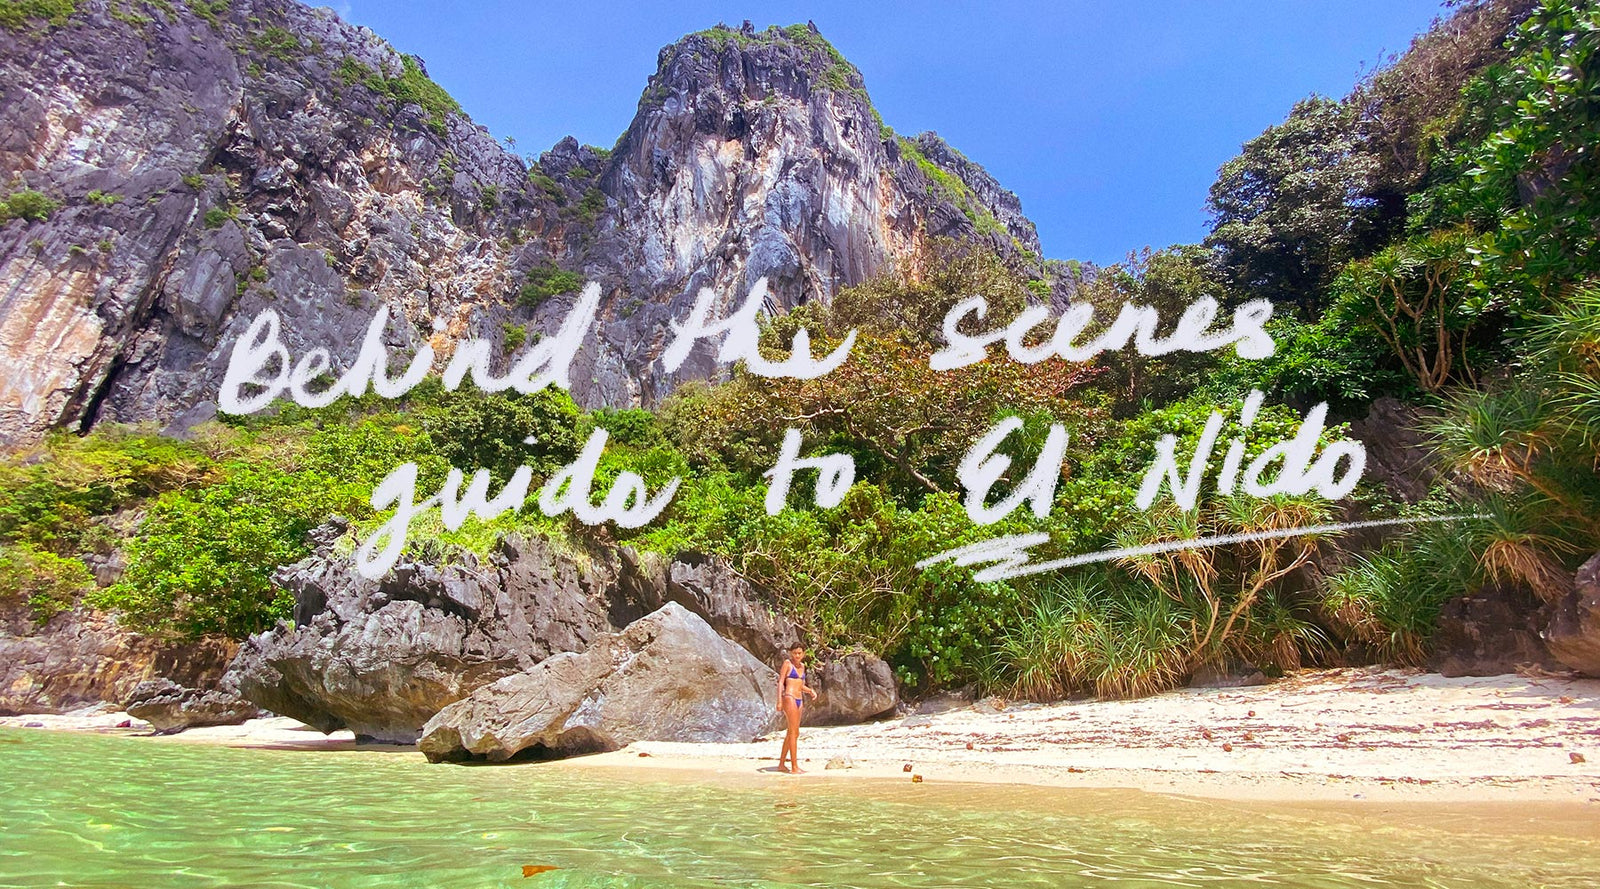 Spectacular view of the Crystal clear water and towering limestones of El Nido Phlippines